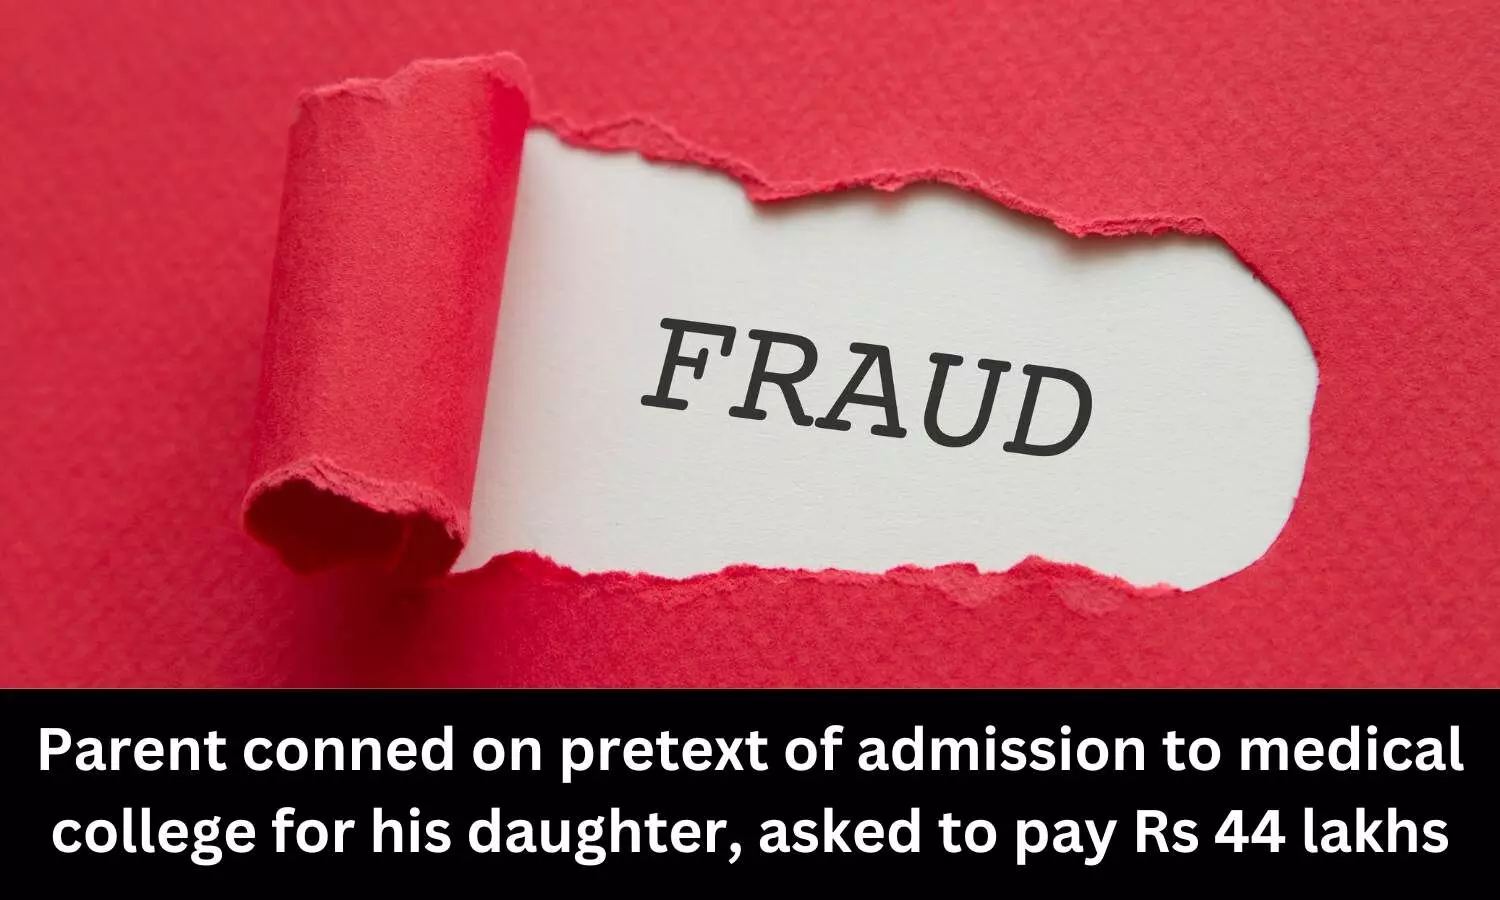 Parent conned on pretext of admission to medical college for his daughter, asked to pay Rs 44 lakhs